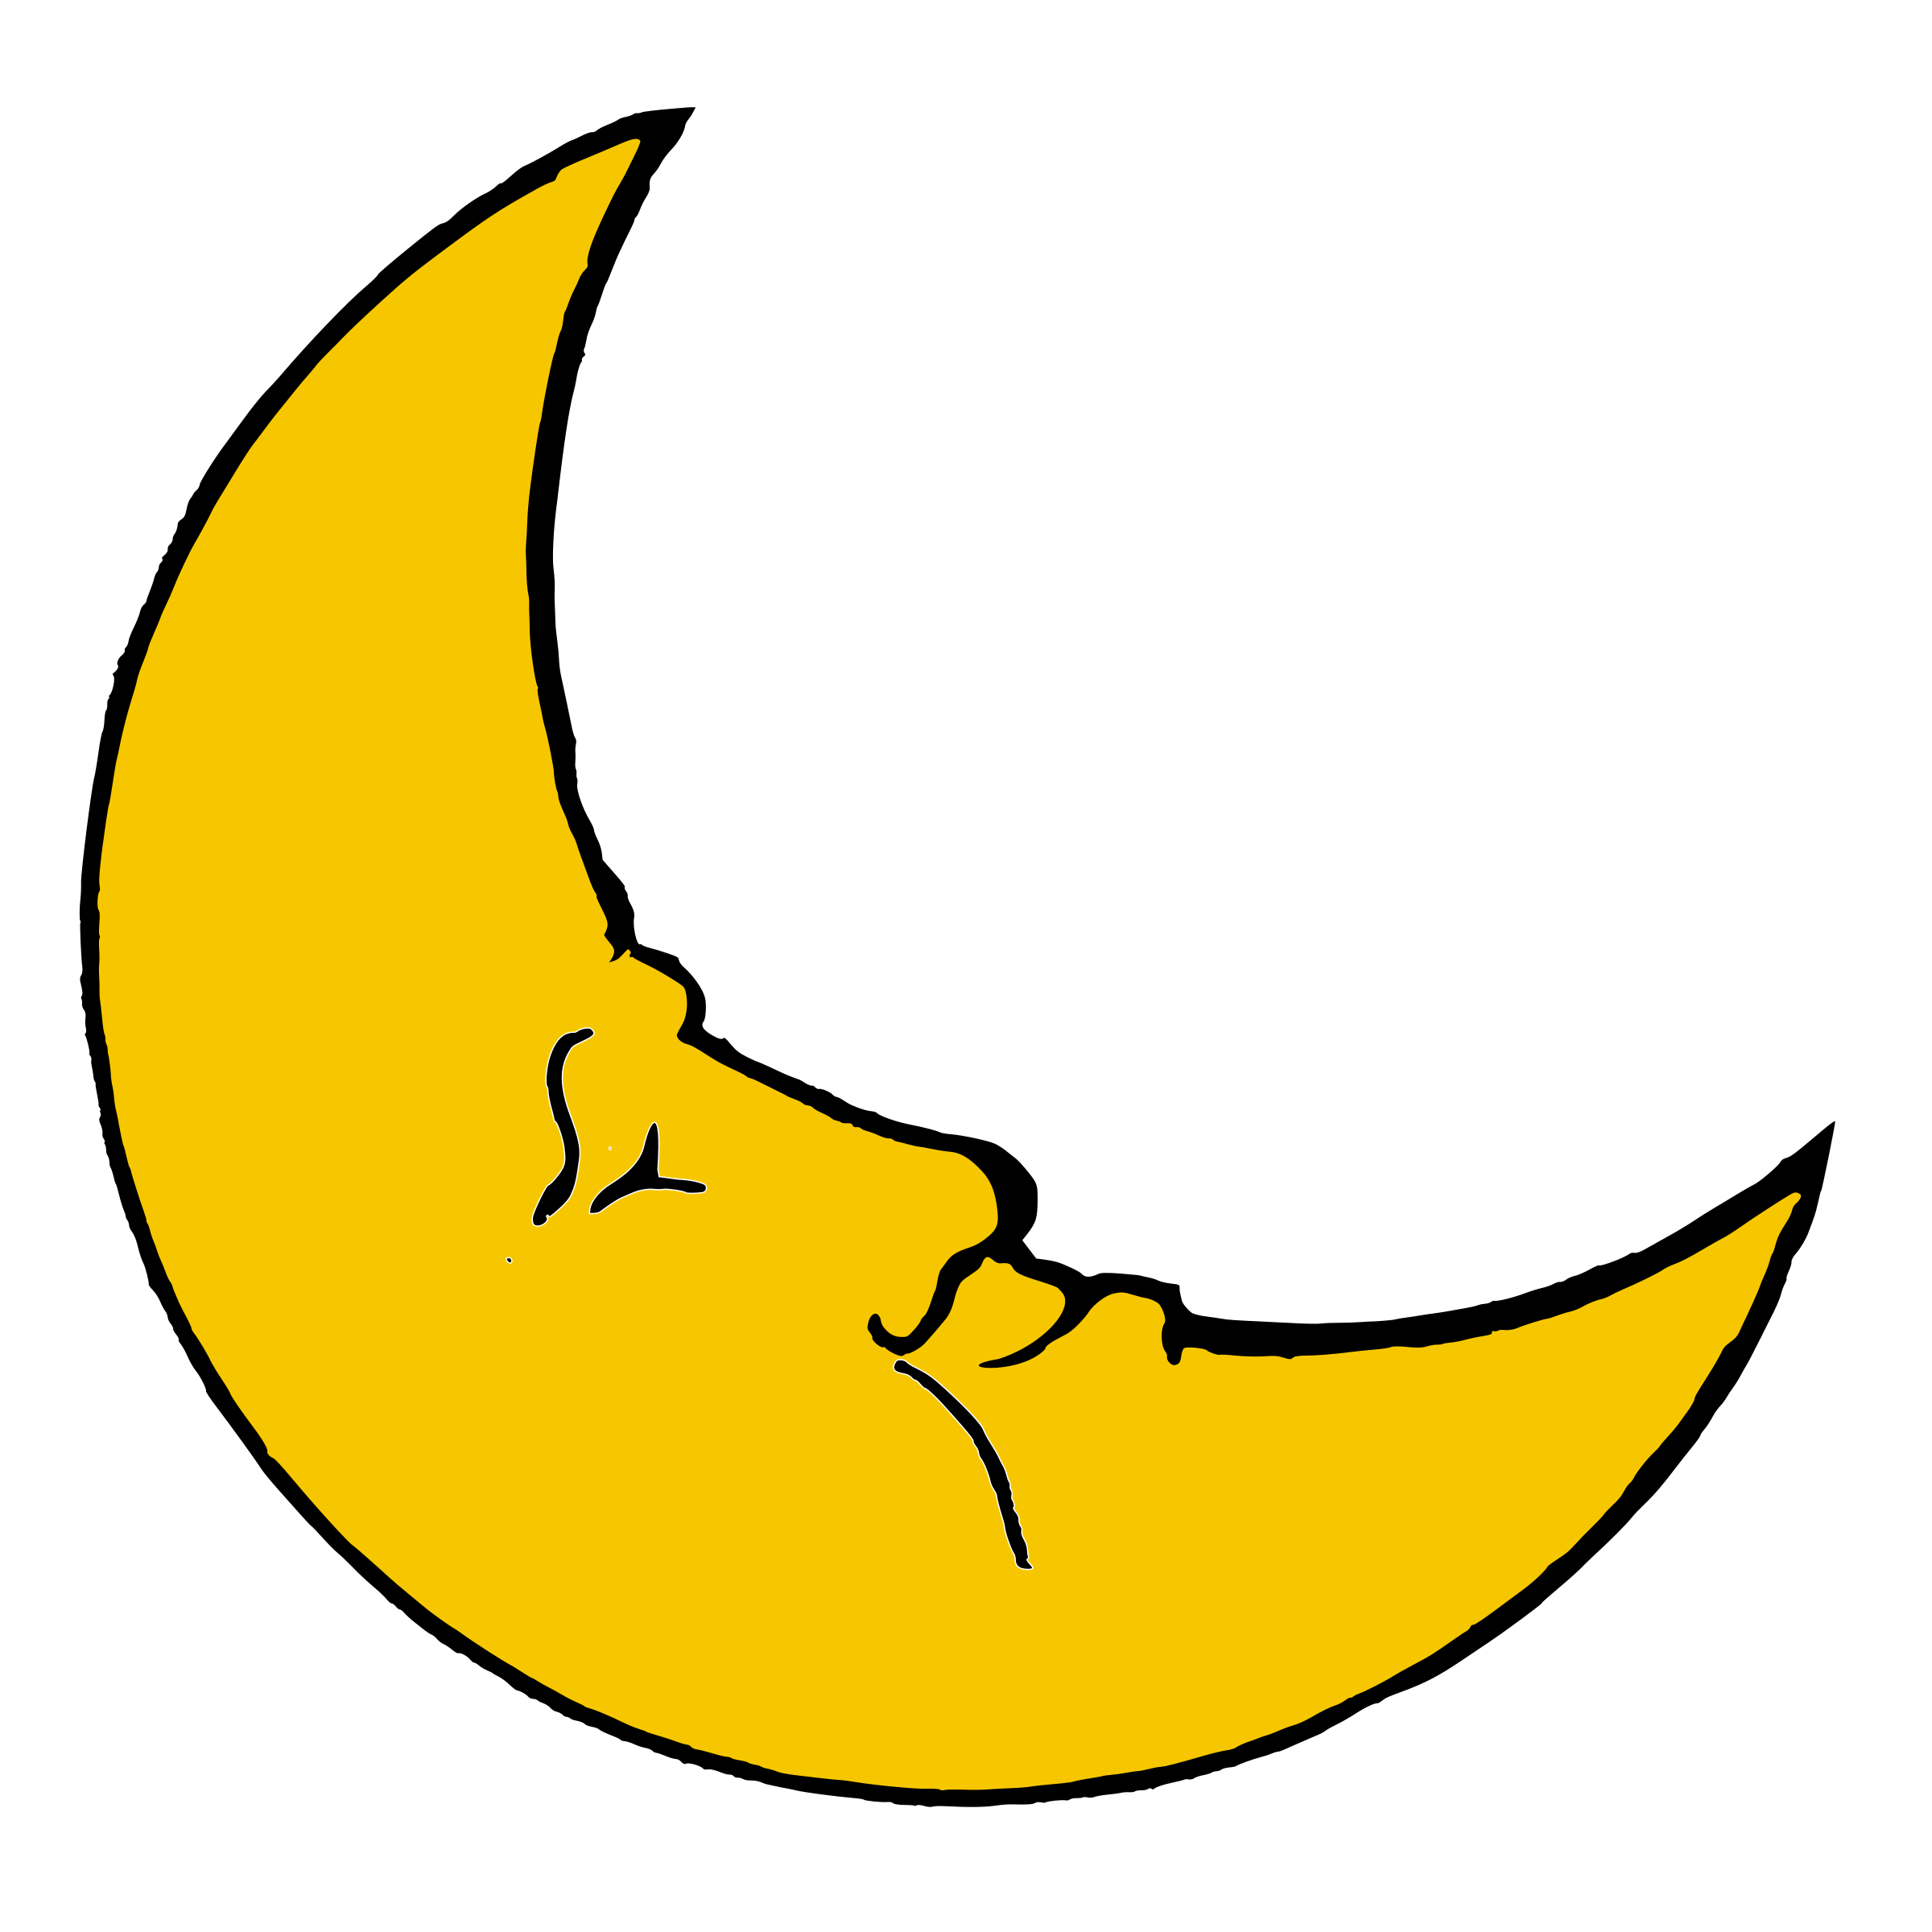 Moon clip art free images free clipart images 4